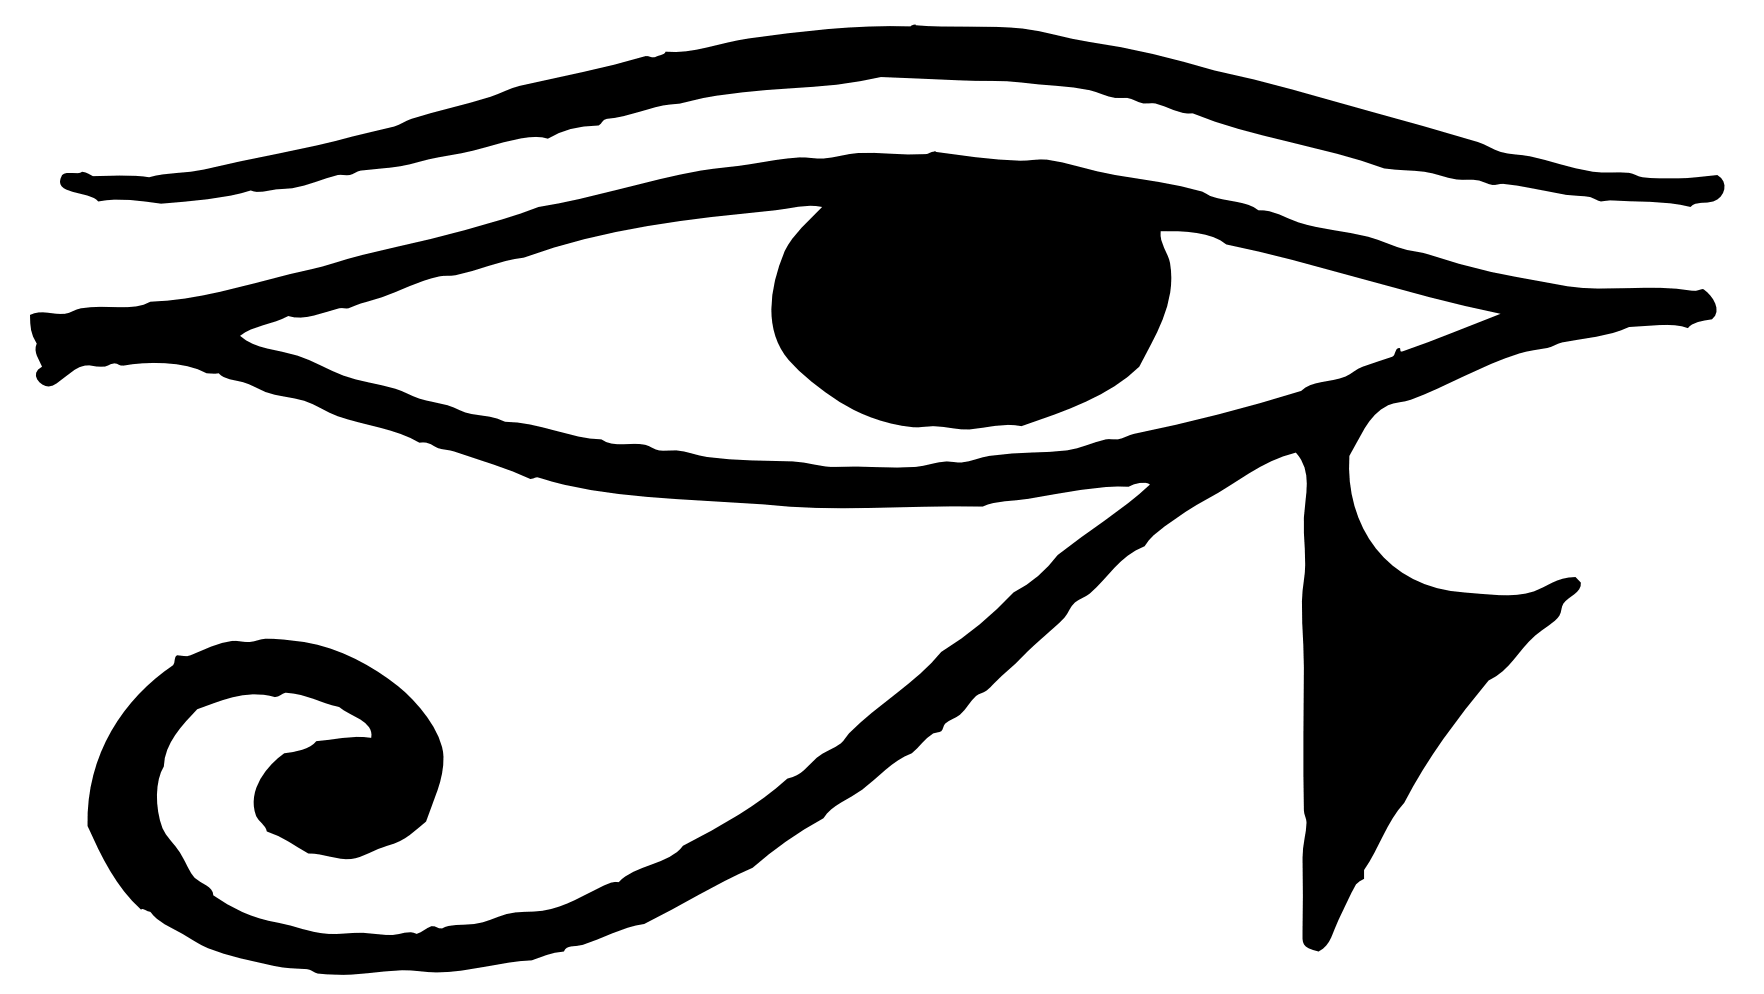 Fantasy Eye of Horus HD Wallpapers and Backgrounds.